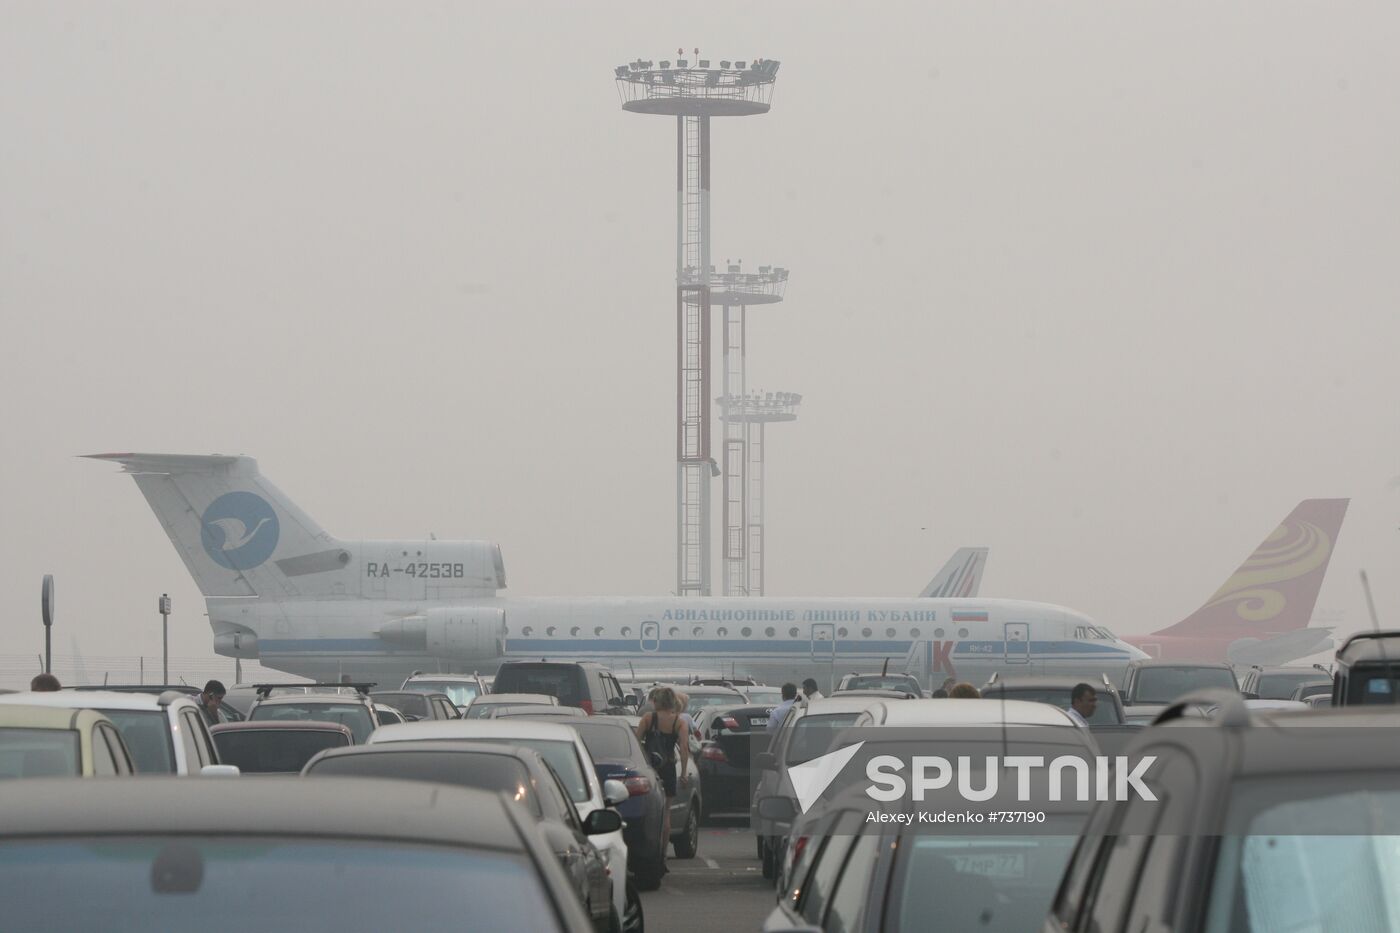 Situation in Domodedovo airport